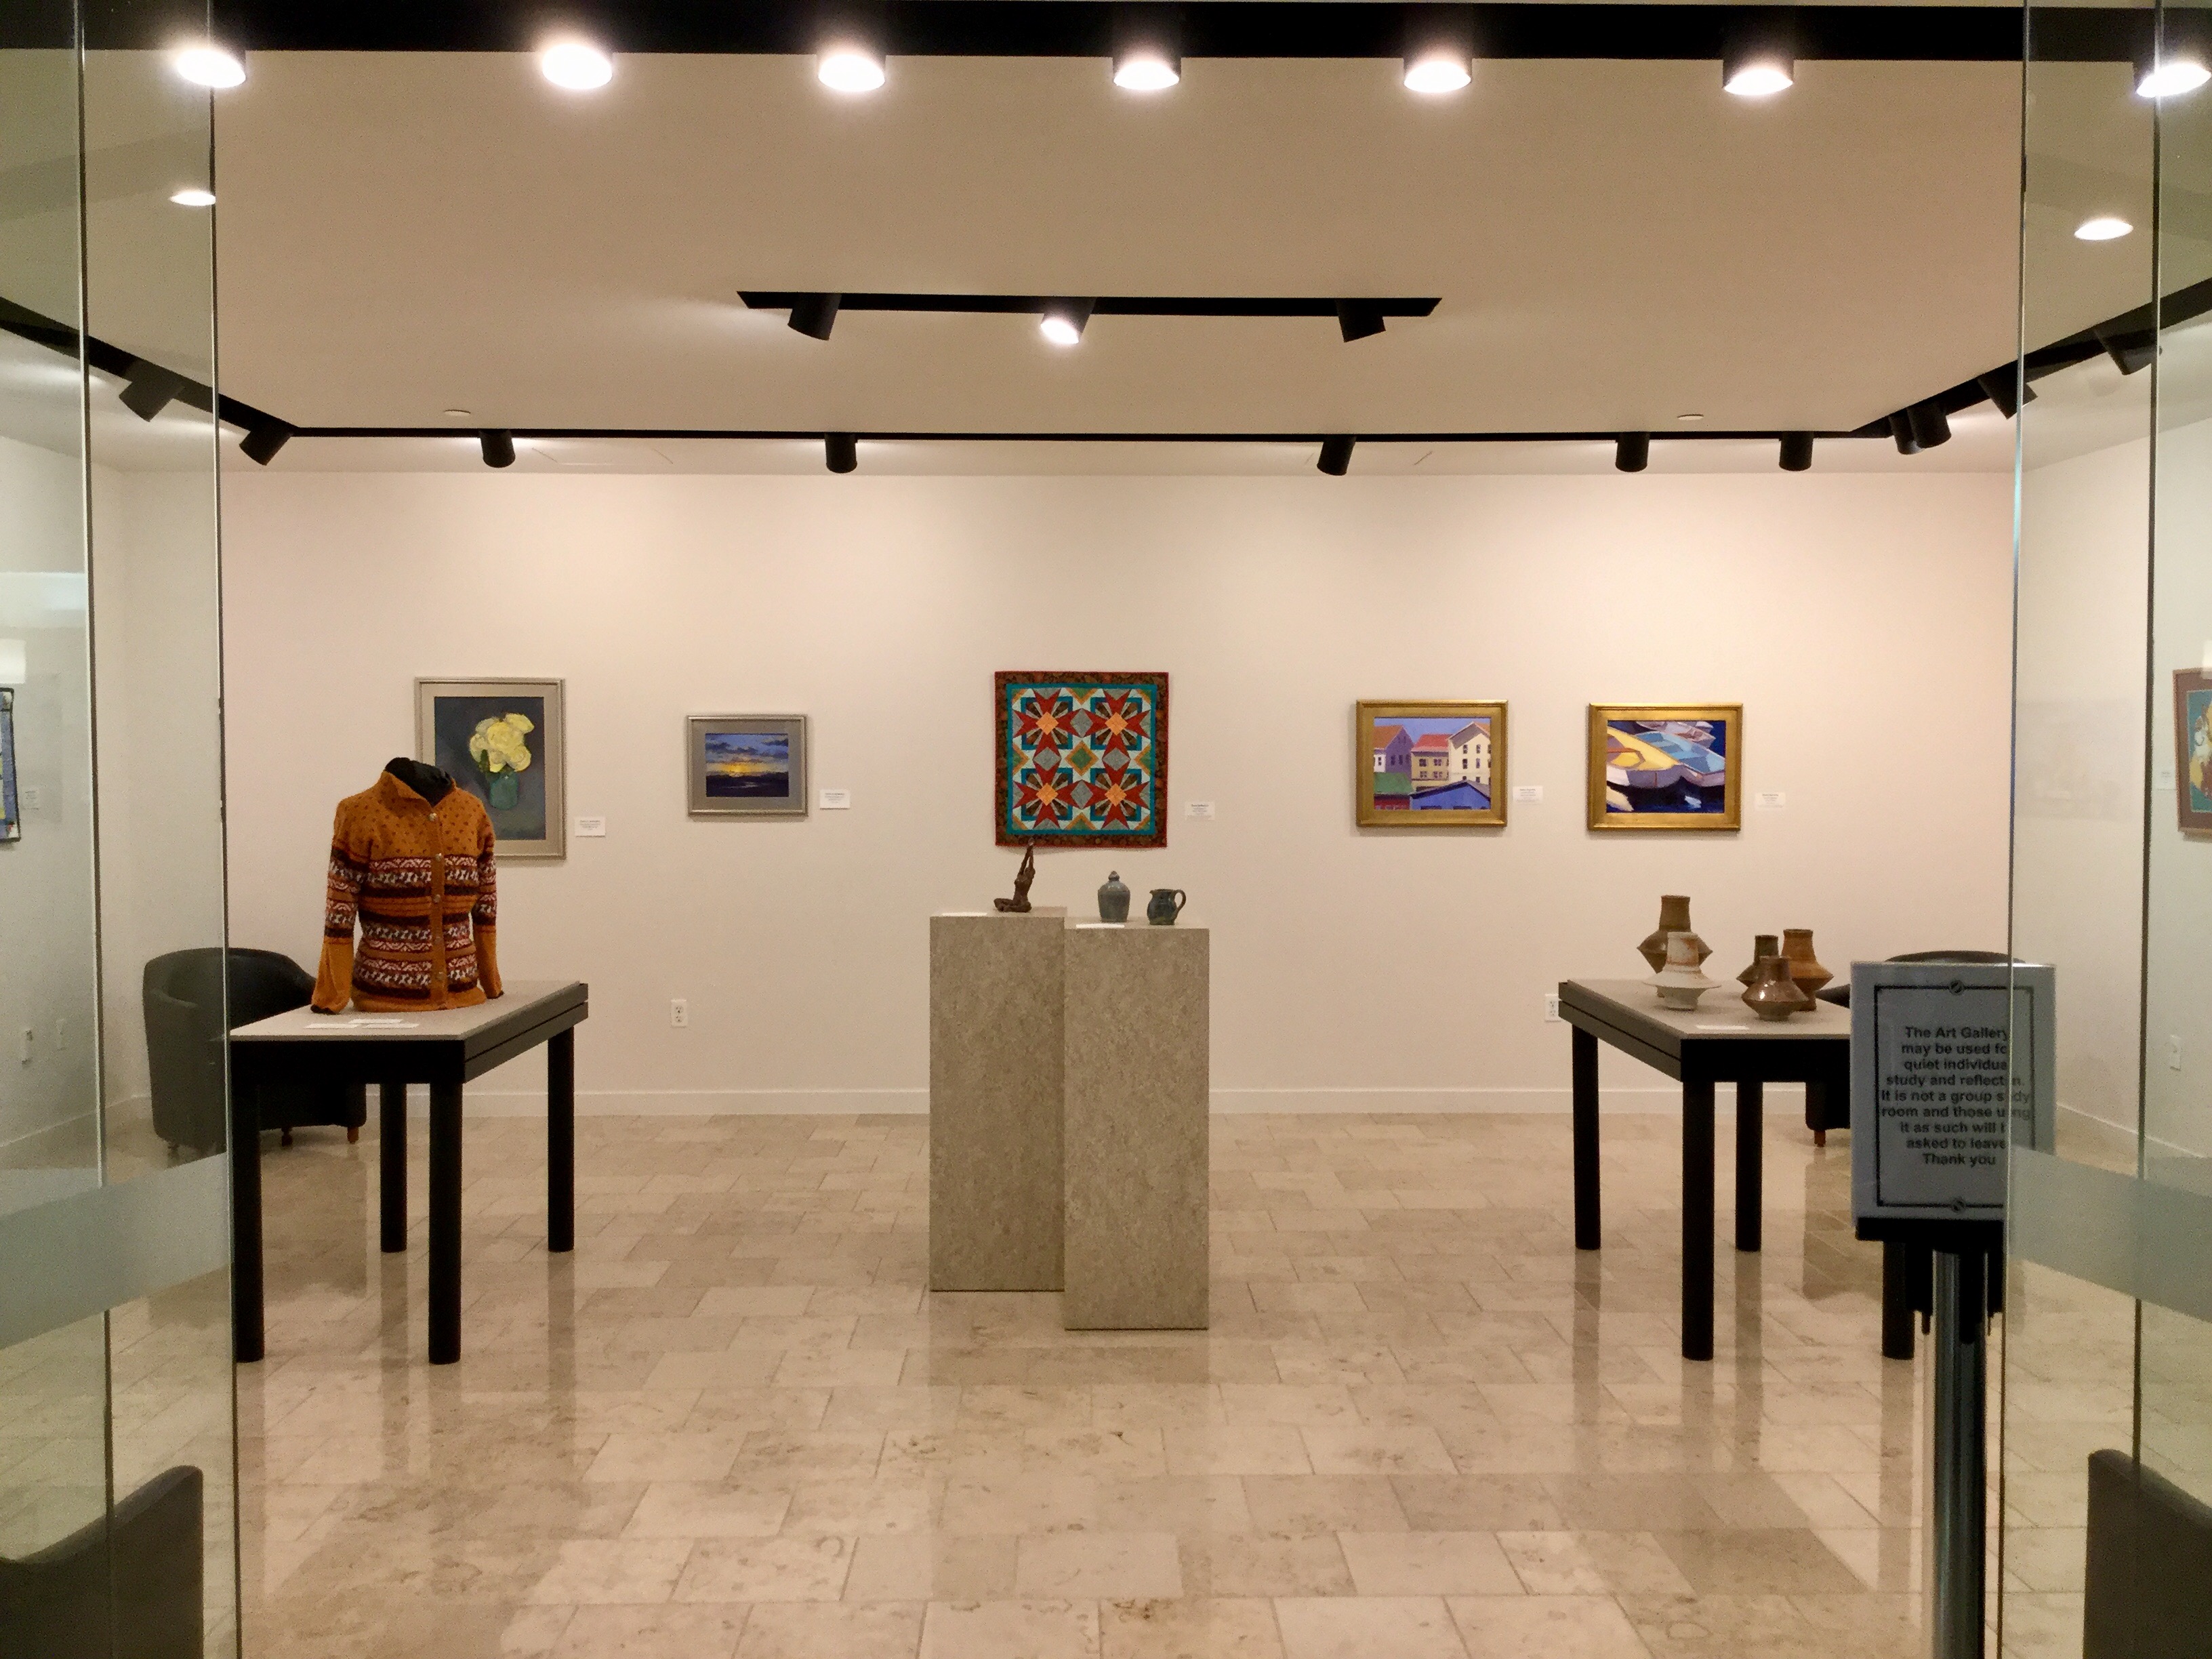 staff artworks on display in the art gallery